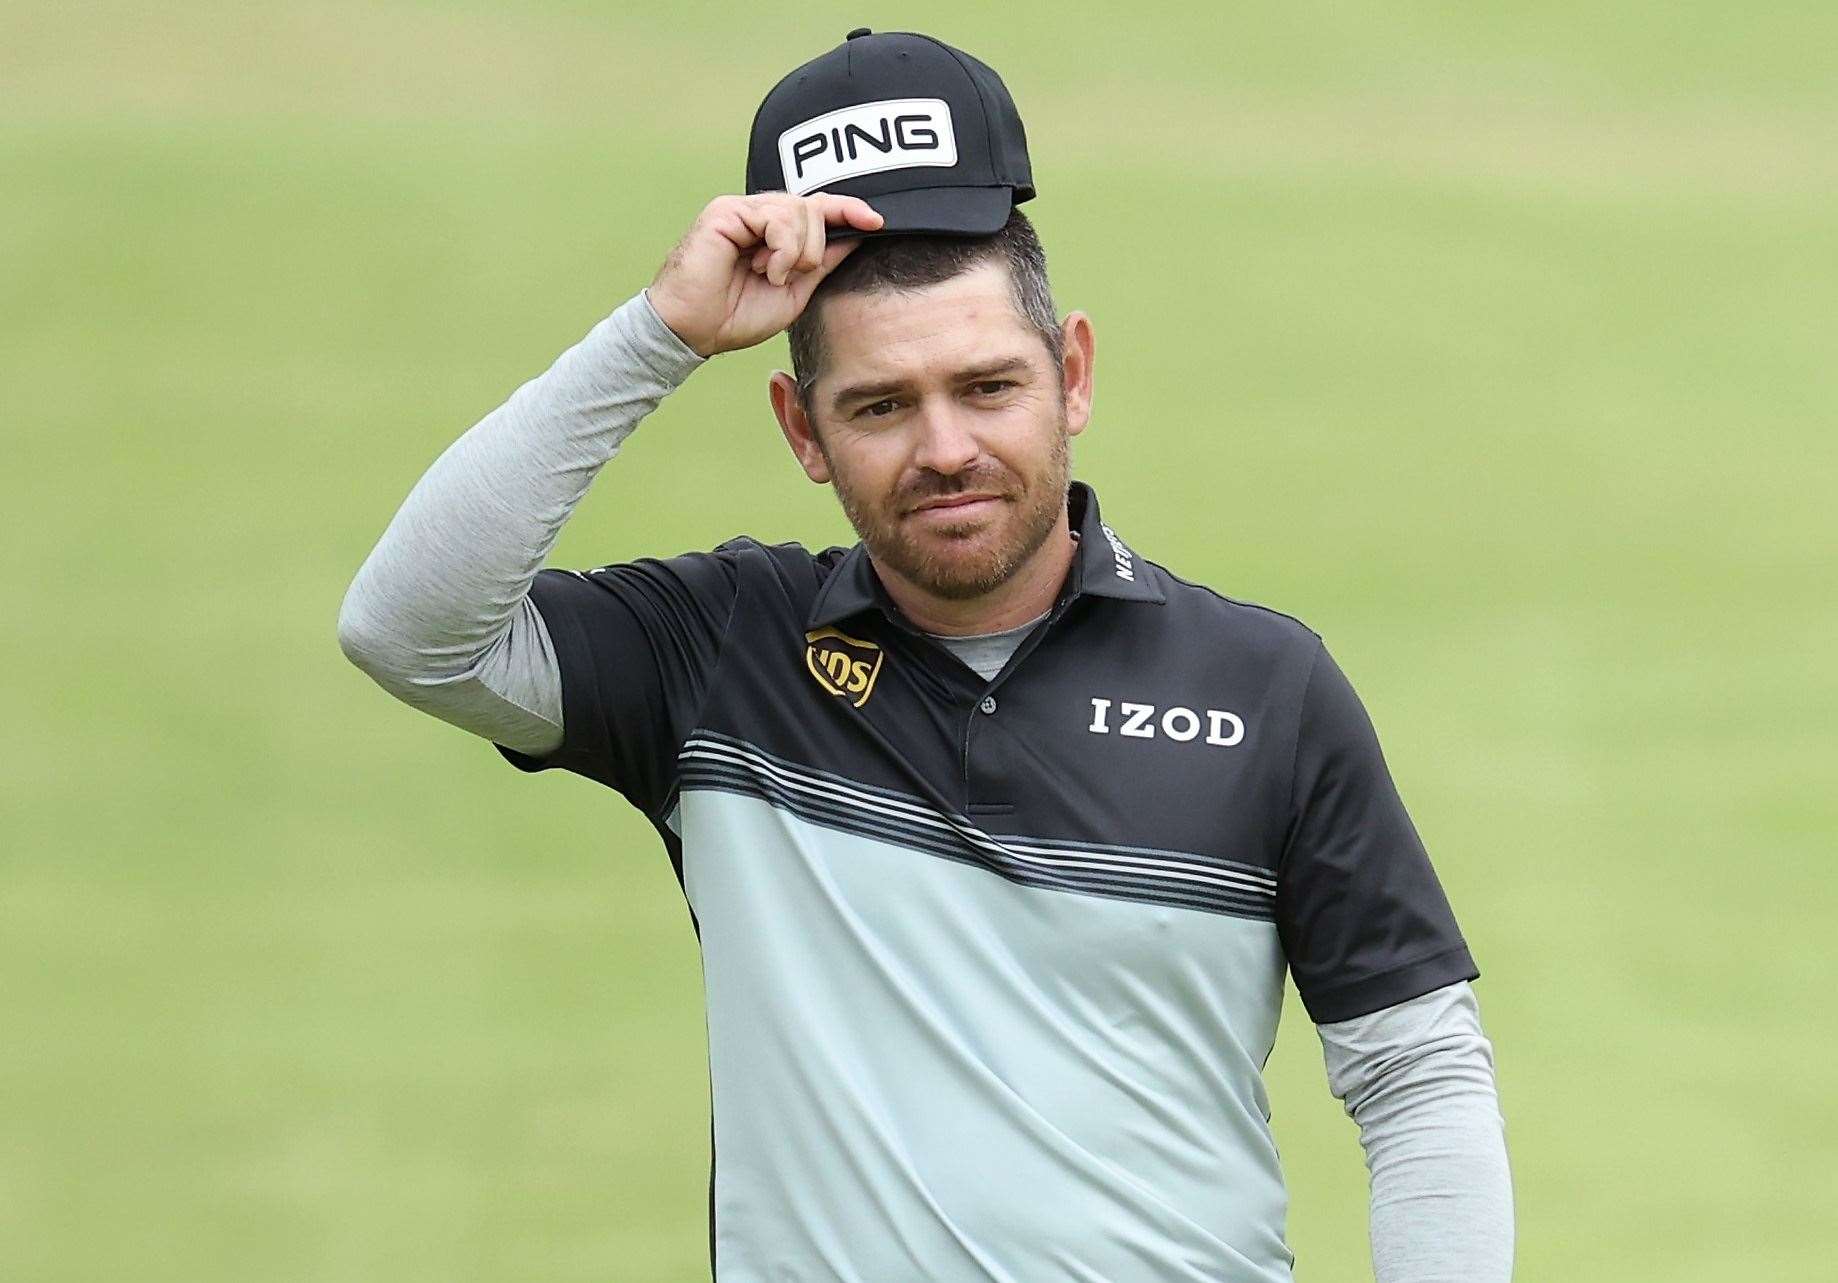 Louis Oosthuizen of South Africa leads The Open after day one at Royal St George's. Picture: The R&A (49260513)